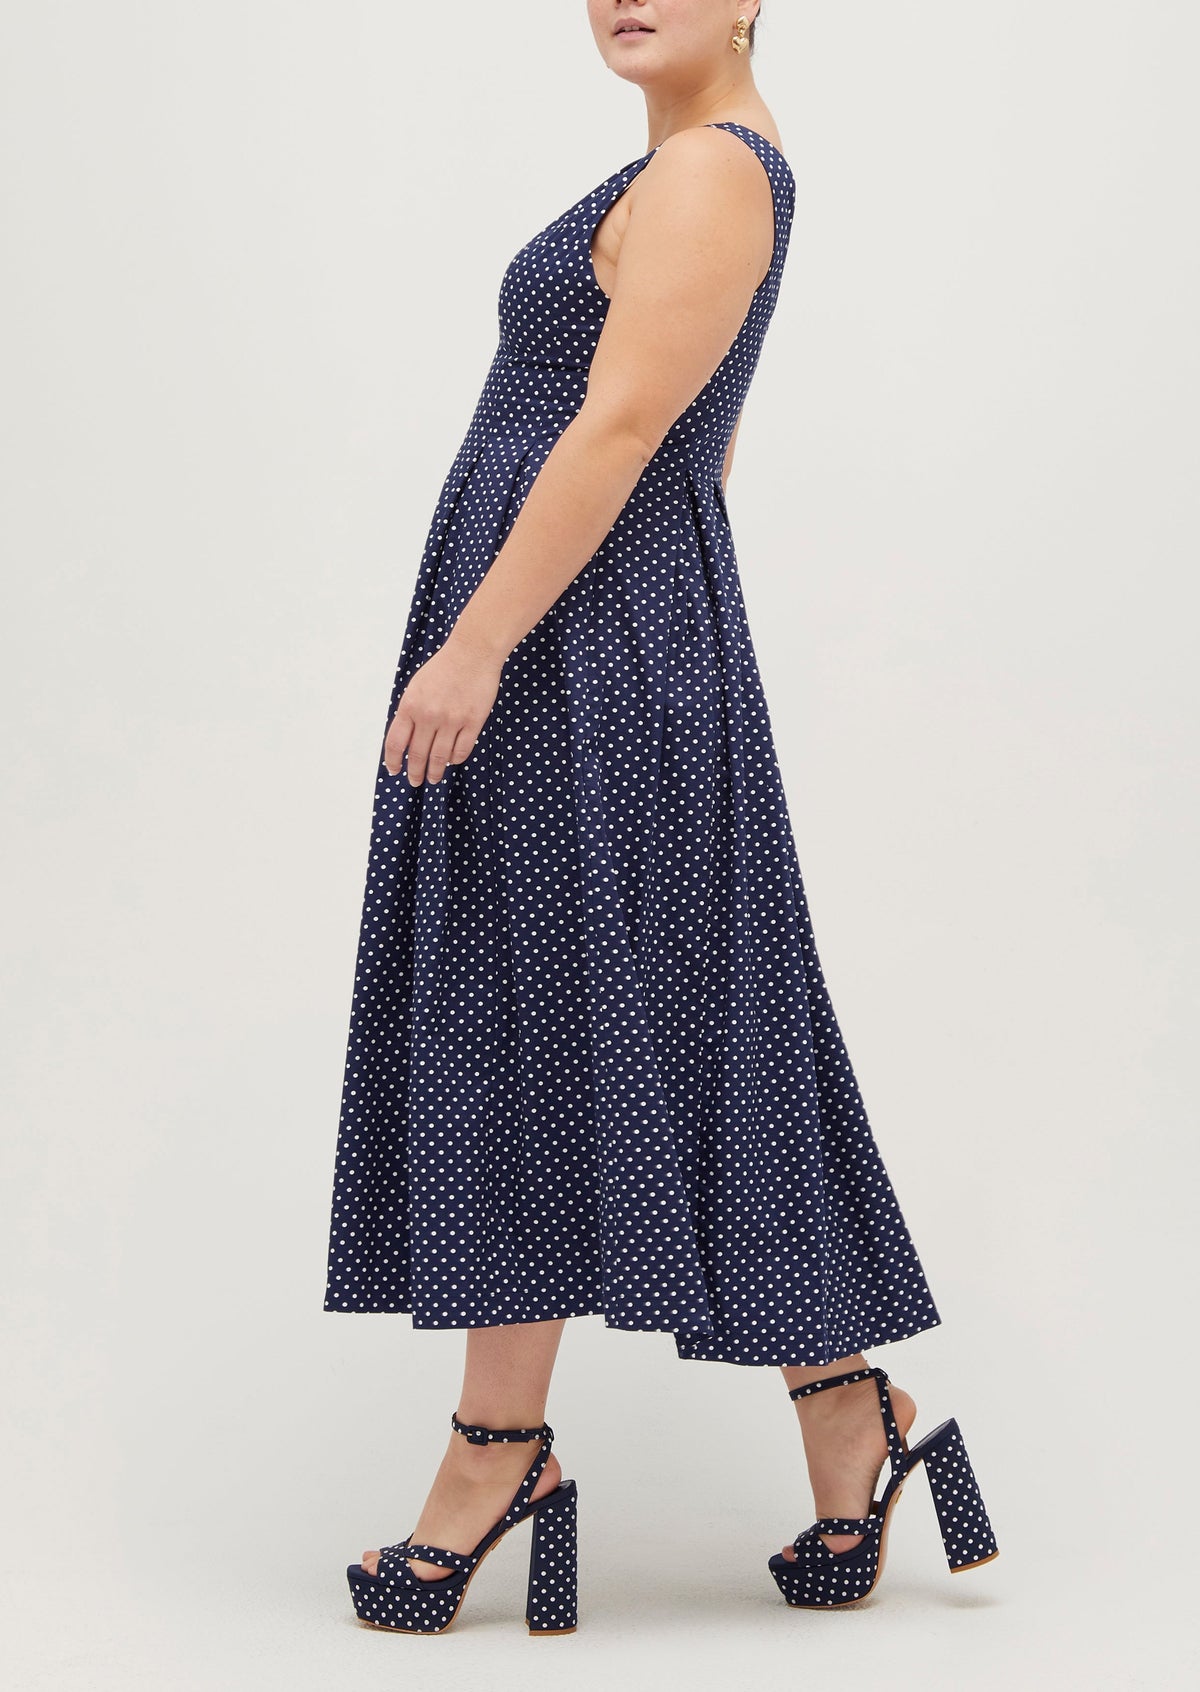 Anna is 5’8” and wears a size L in the Navy Polka Dot Cotton Sateen color: Navy Polka Dot Cotton Sateen